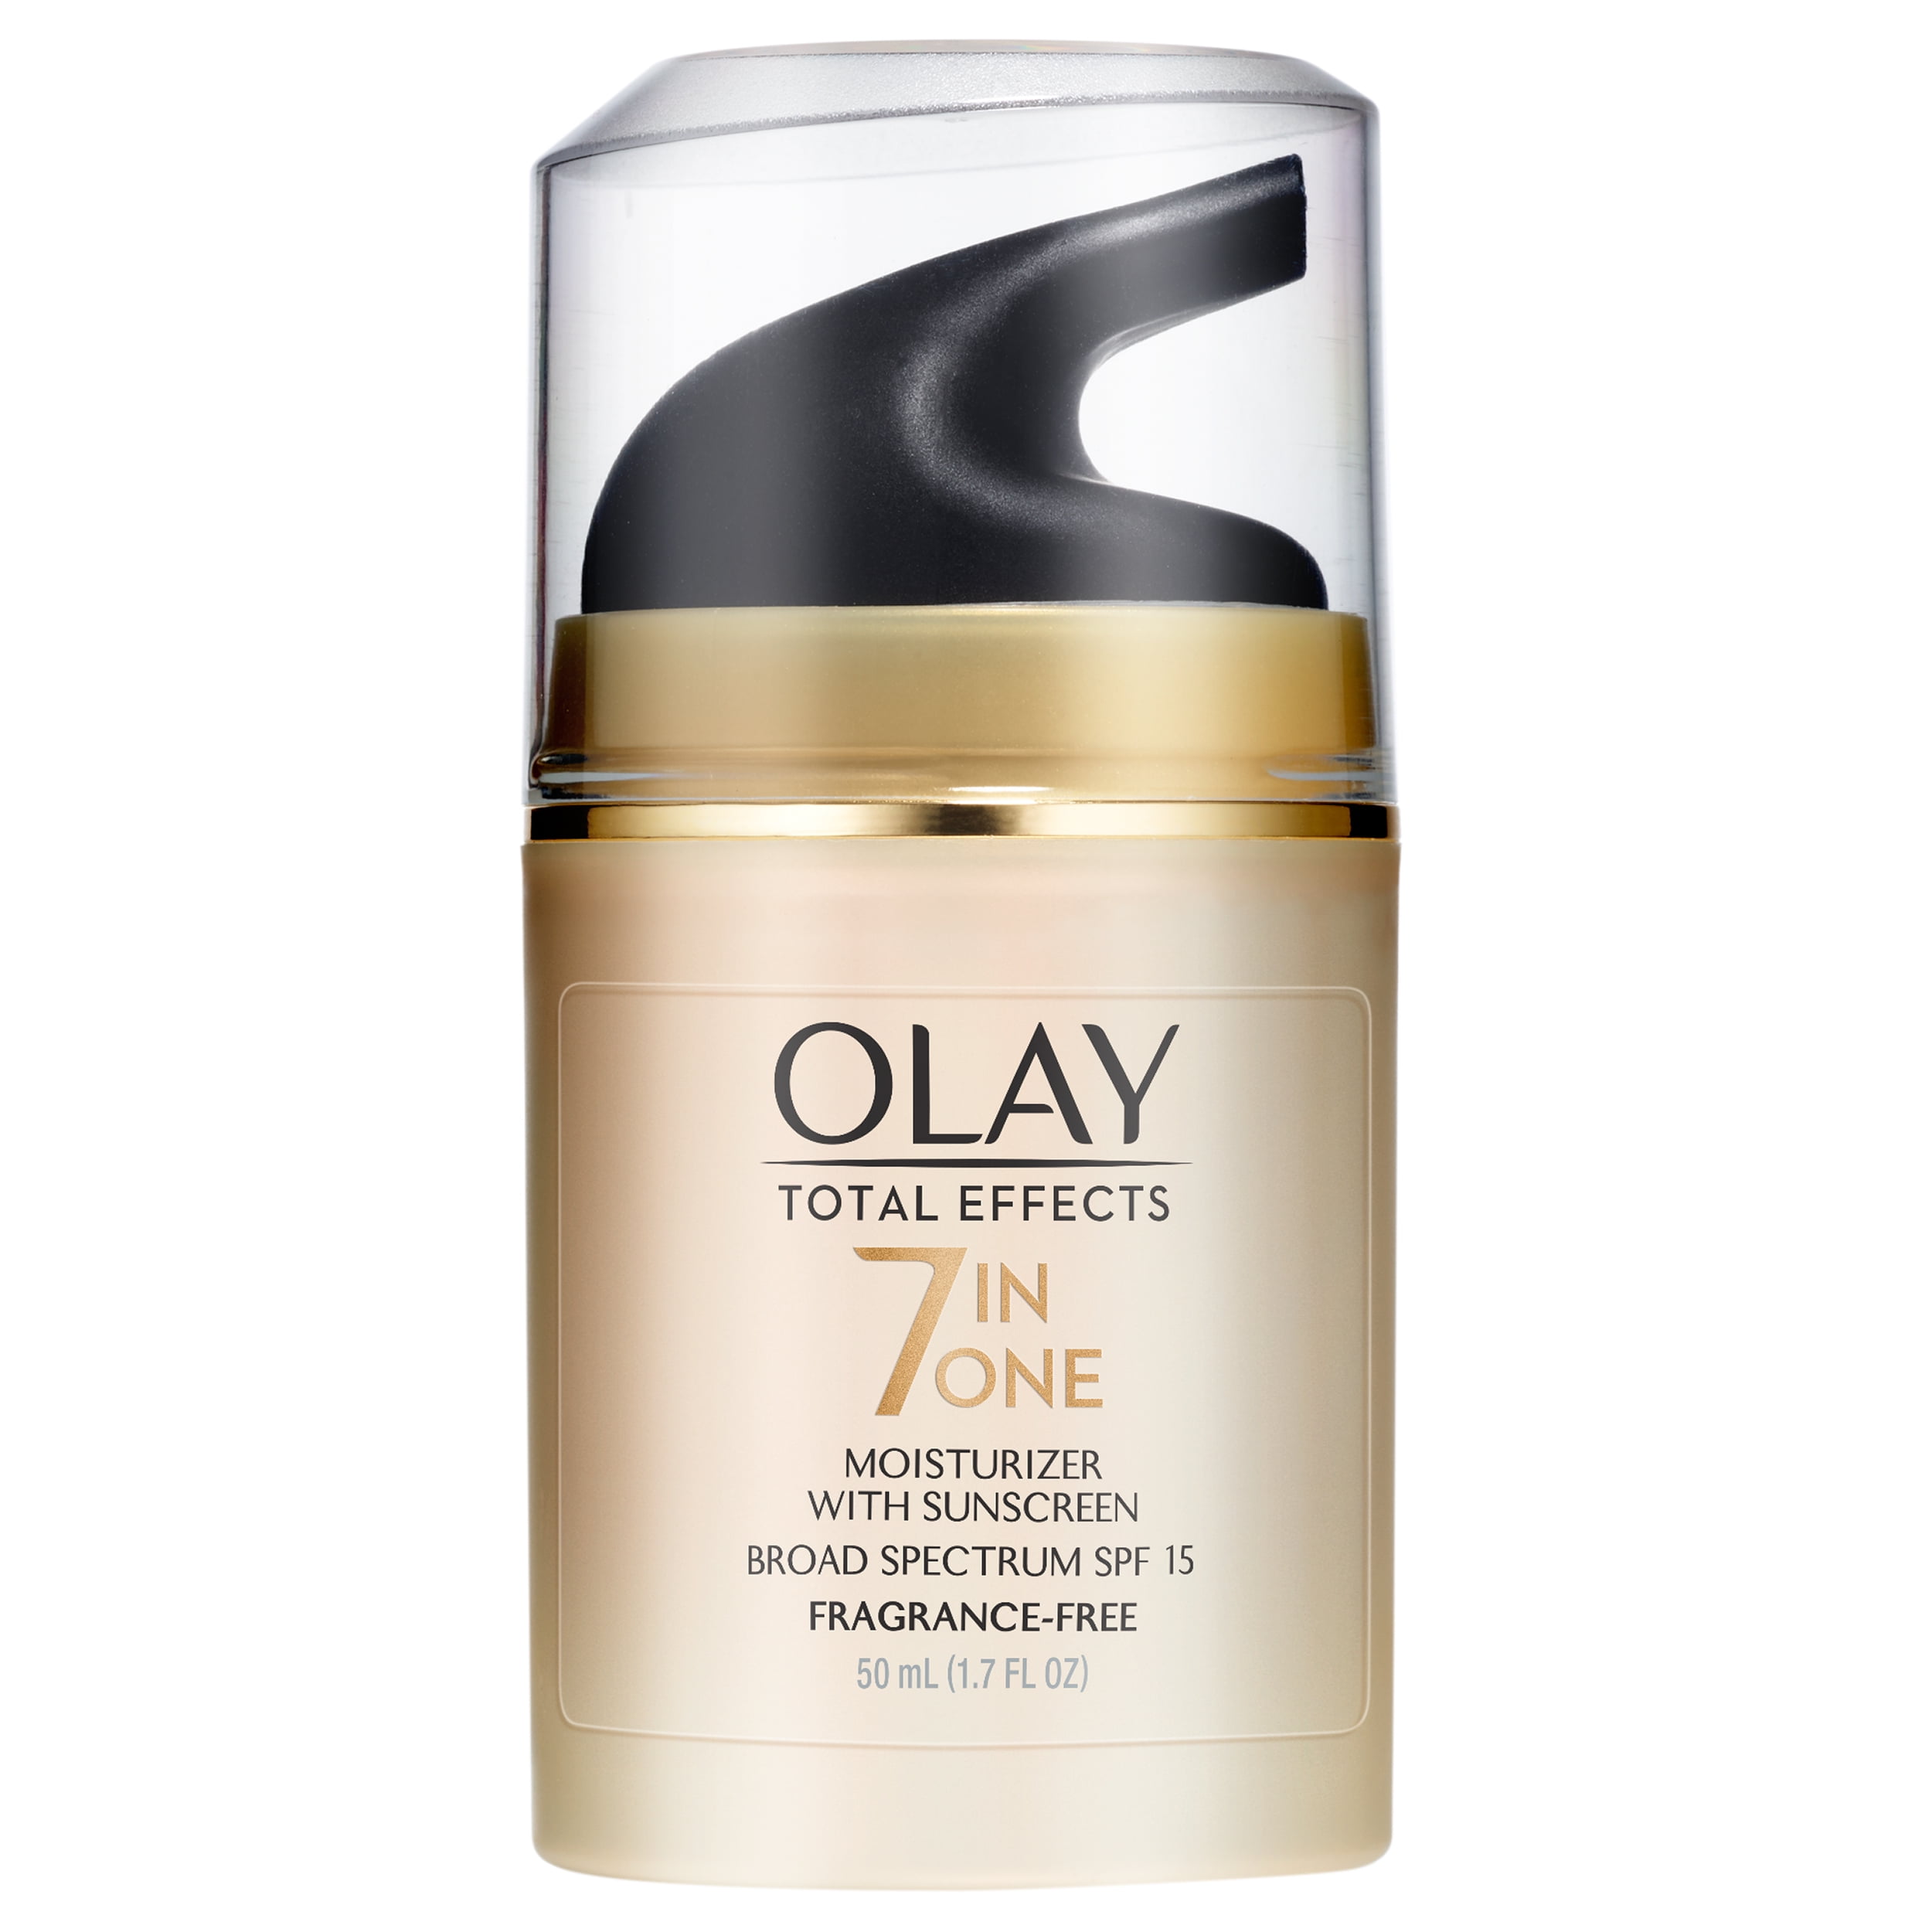 Olay Total Effects Face Moisturizer SPF